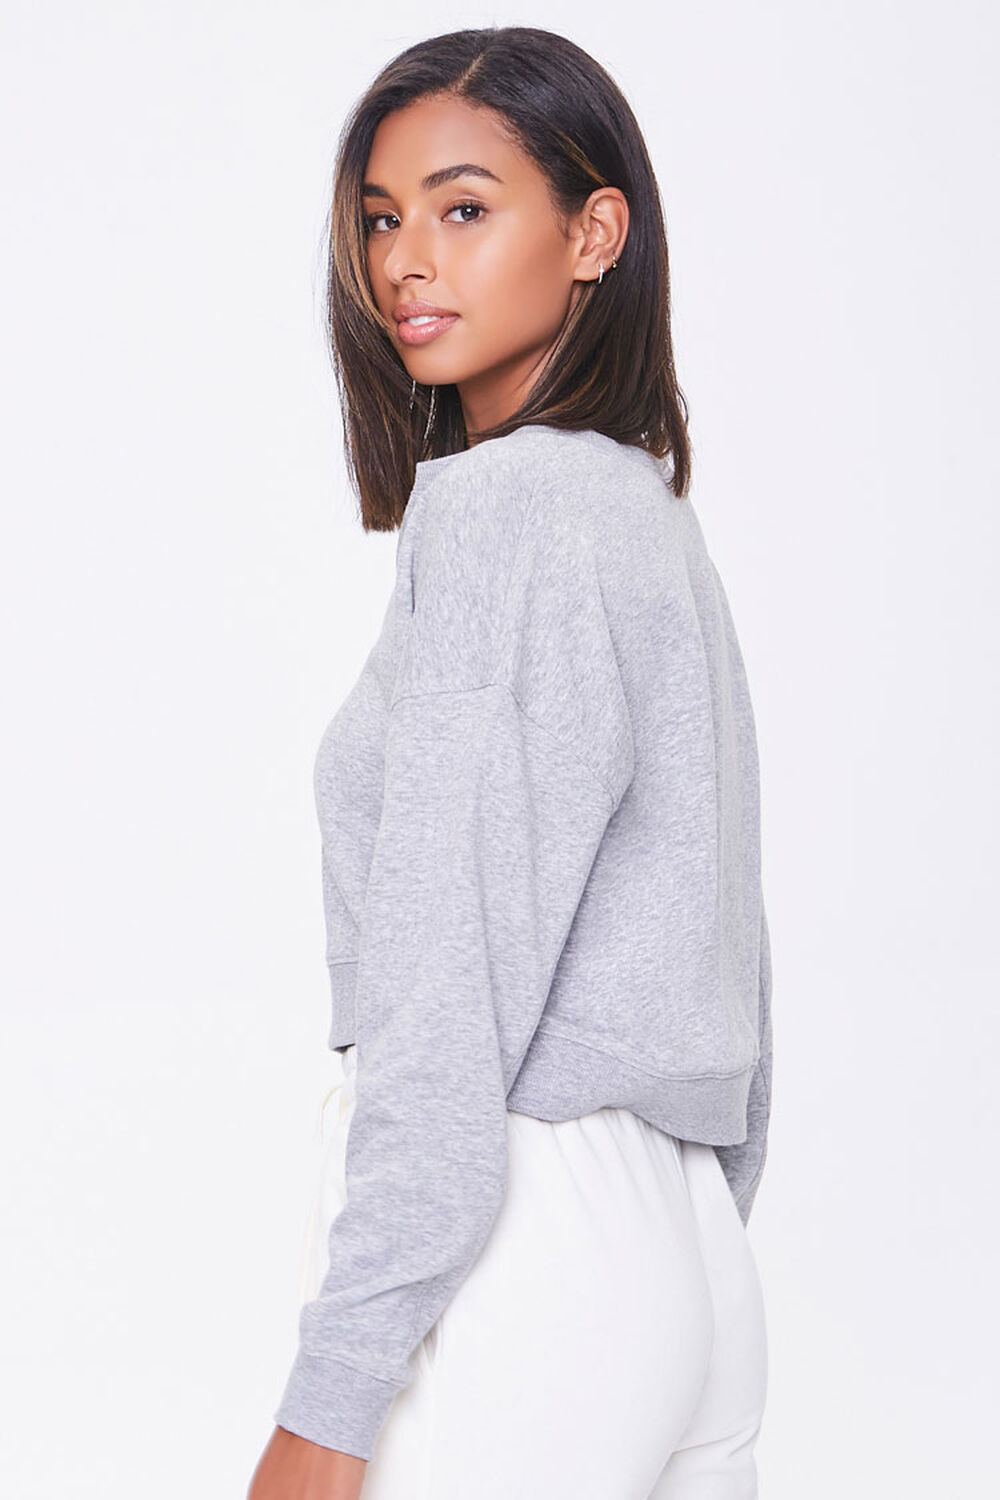 HEATHER GREY Split-Neck French Terry Pullover, image 2